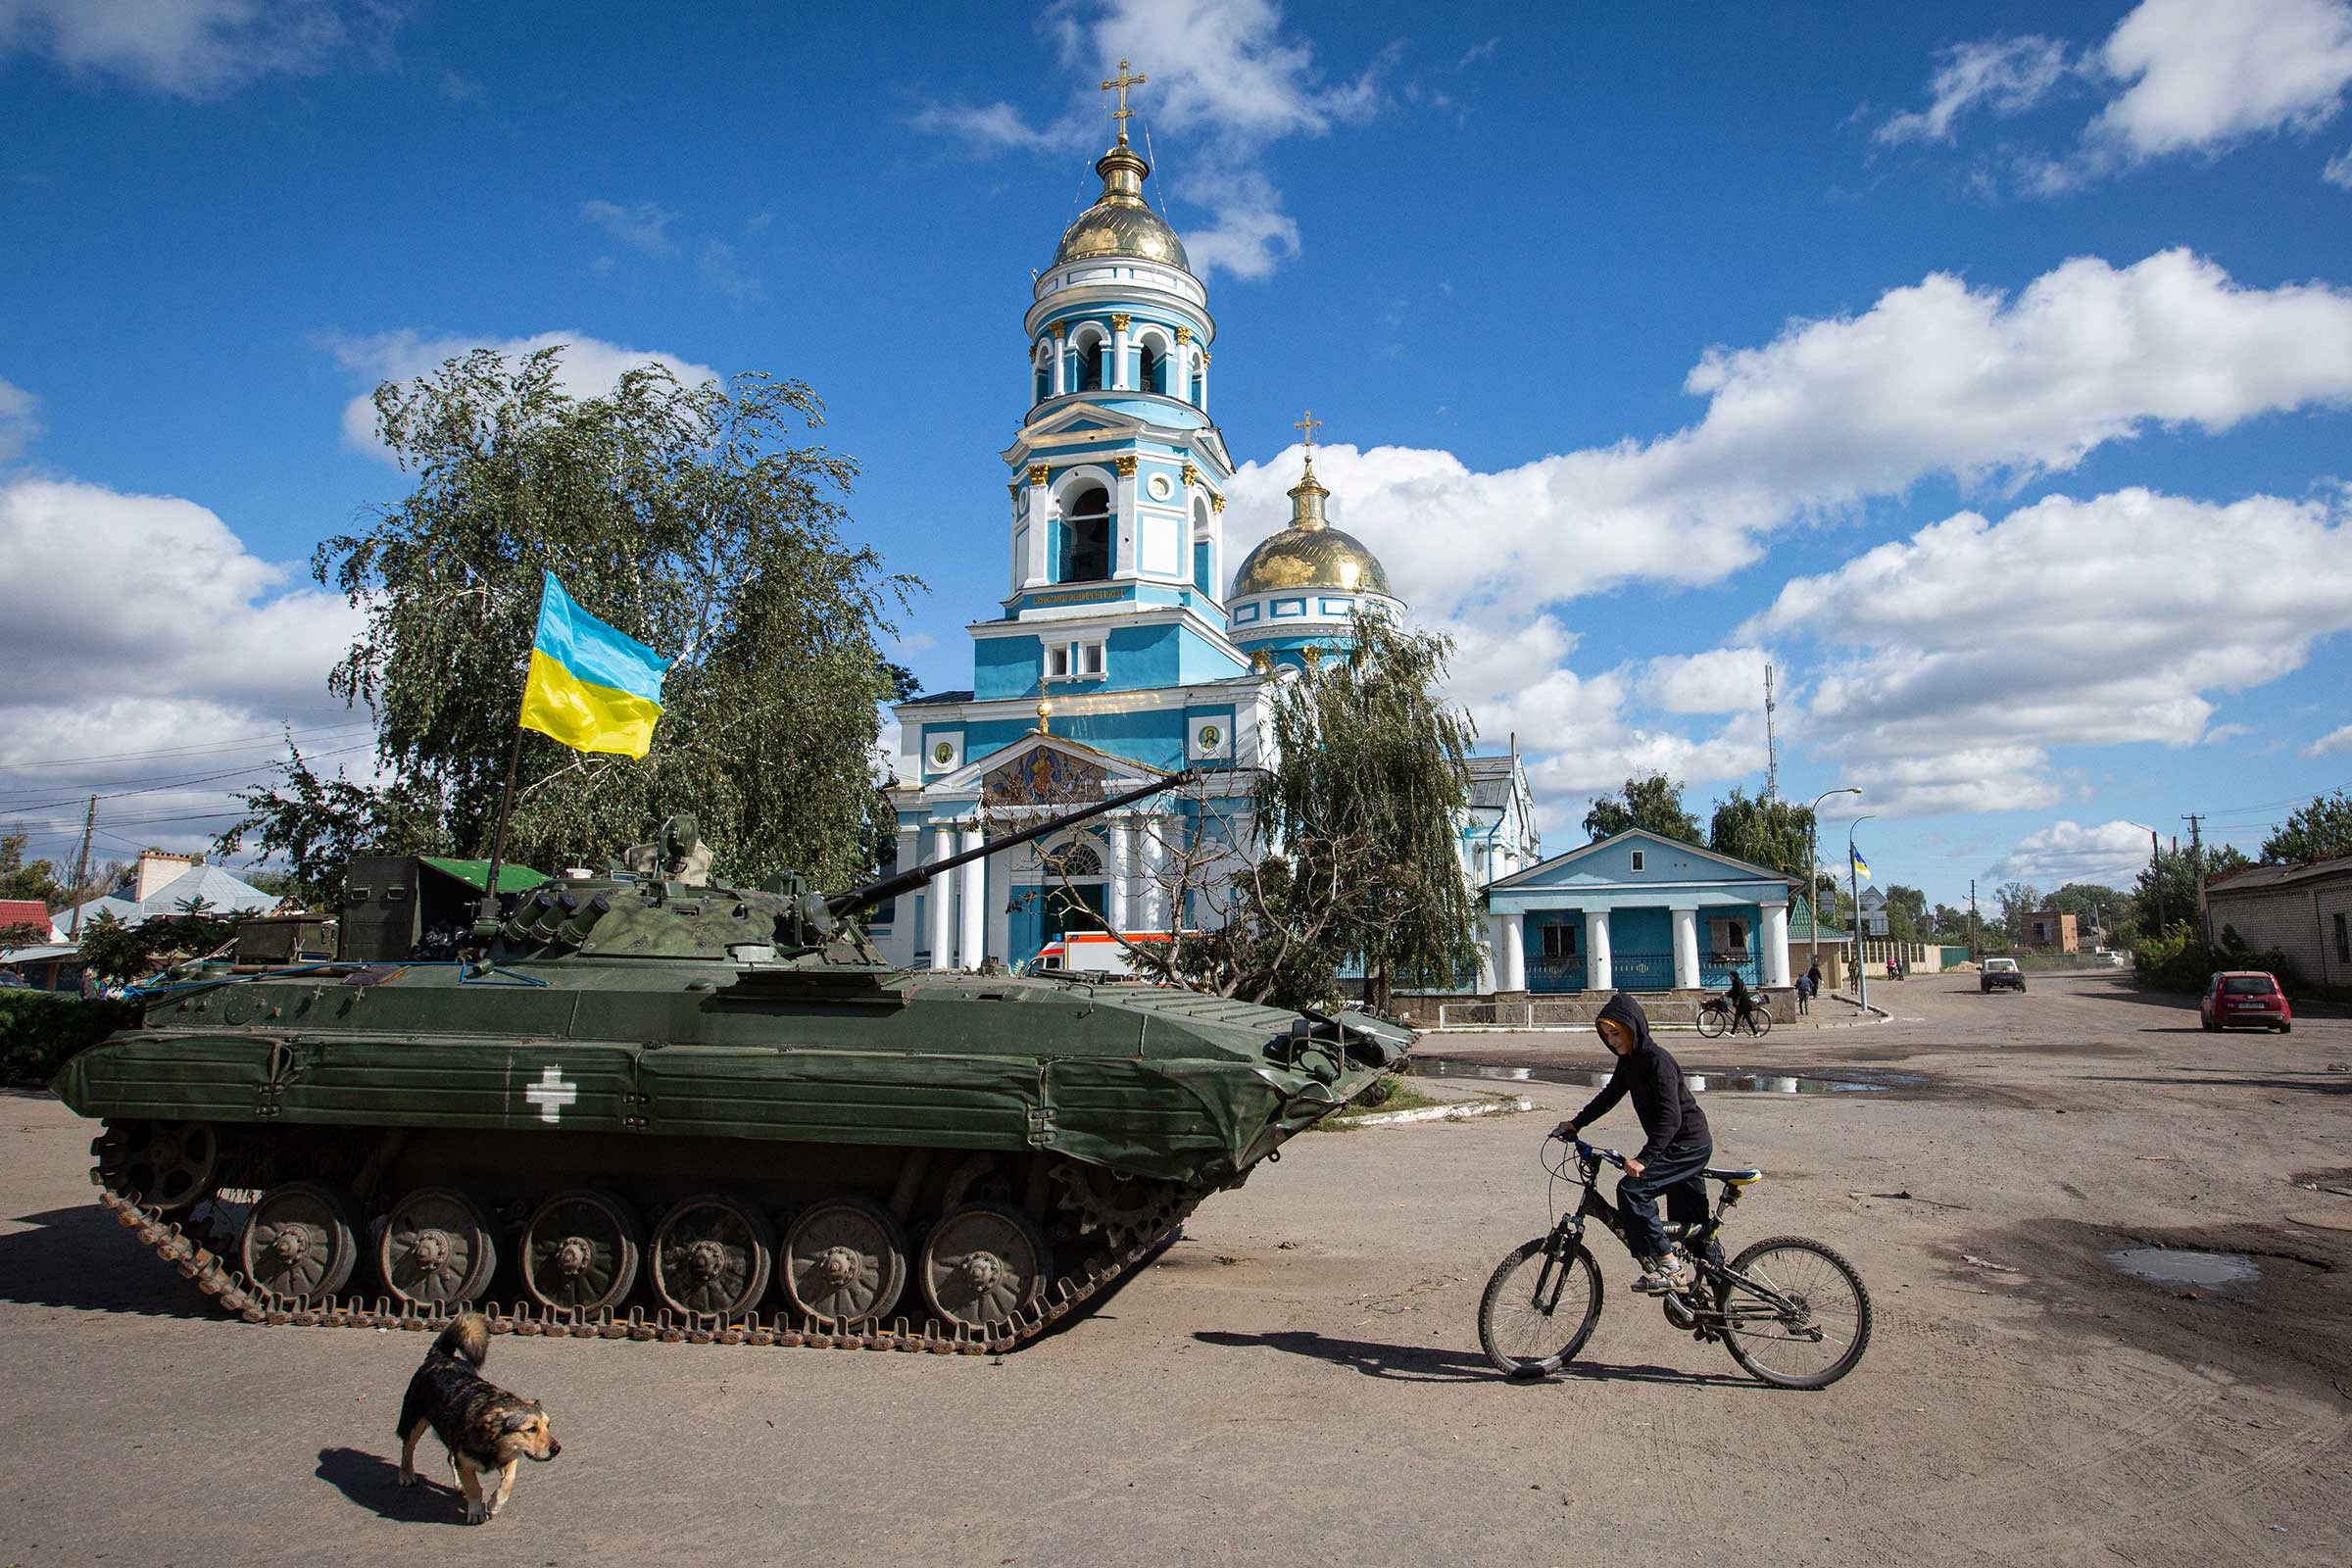 A boy rides a bicycle near an armored tank with a Ukrainian flag in the town of Izyum on Sept. 19. (Oleksii Chumachenko—SOPA Images/LightRocket/ Getty Images)